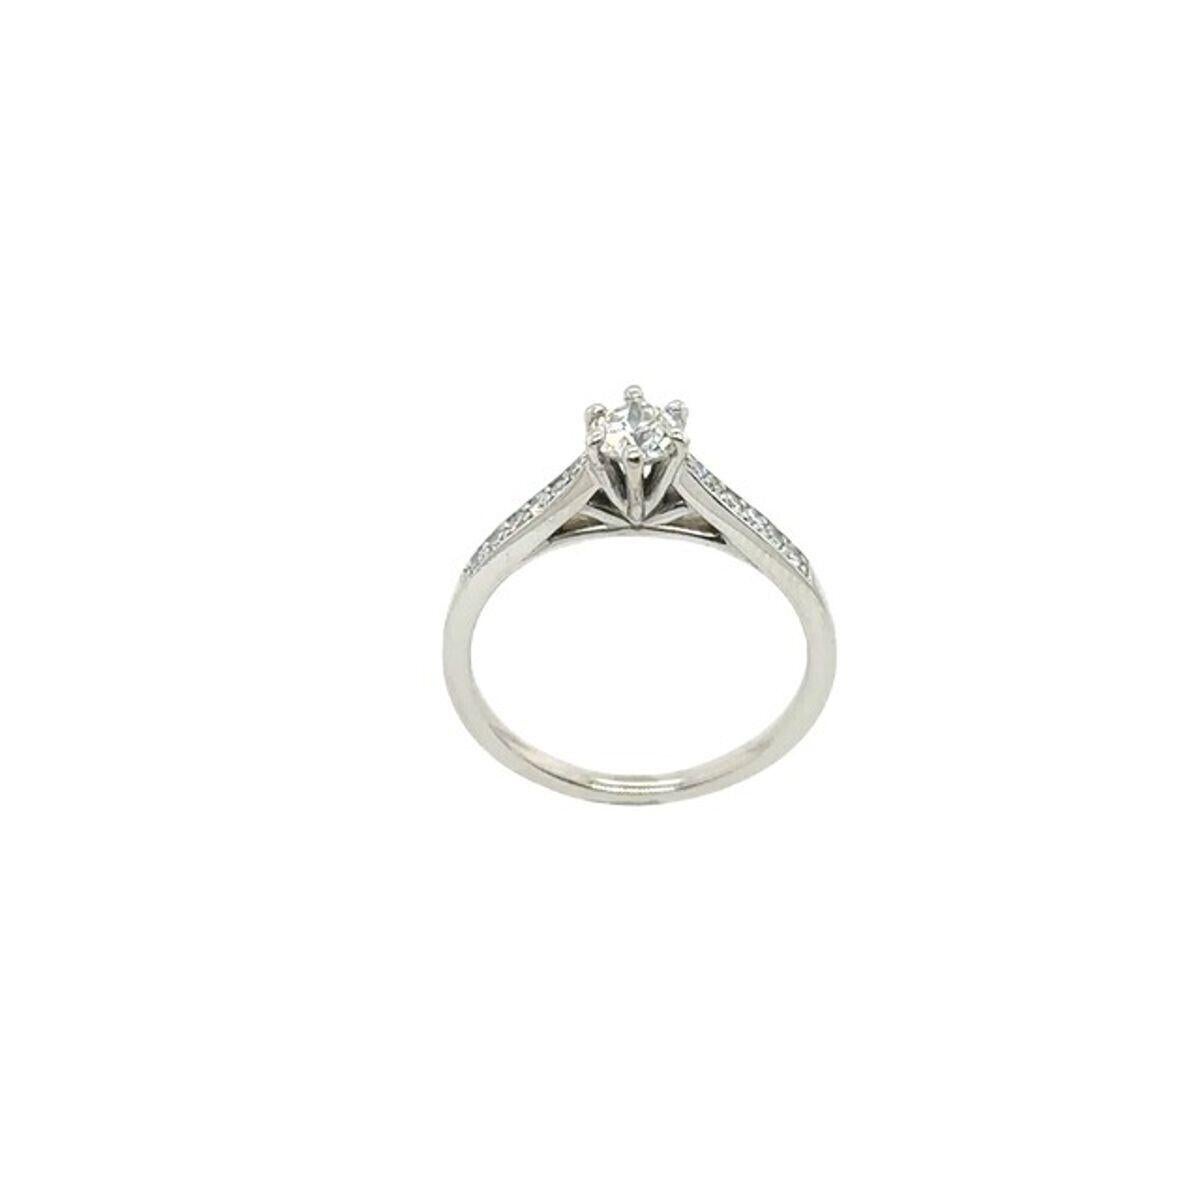 Platinum Set Solitaire Diamond Ring, Set With 0.33ct 

Set With 6 Diamonds on Each Shoulder

Additional Information: 
Total Diamond Weight: 0.33ct
Diamond Colour: H
Diamond Clarity: SI1
Width of Band: 1.94mm
Width of Head: 4.6mm
Length of Head: